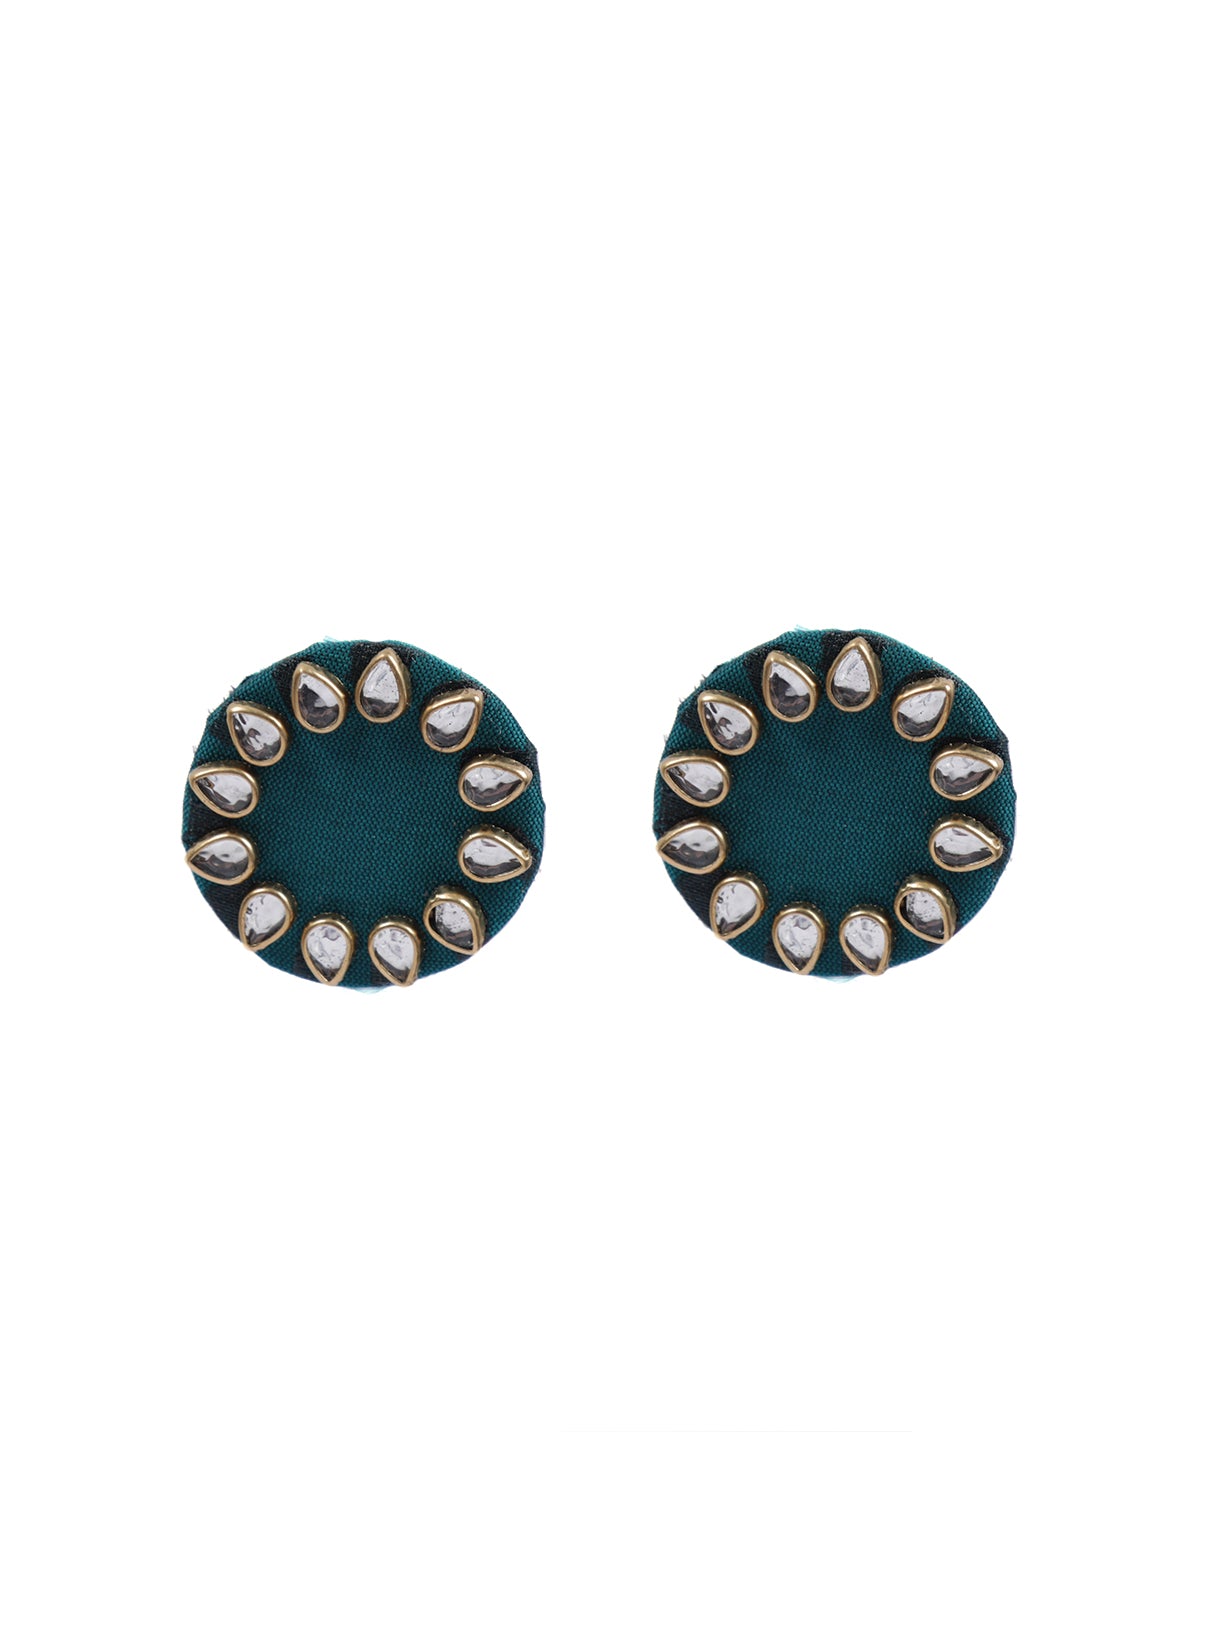 Blue Circular Fabric Stud Earrings with White Stones Detailing